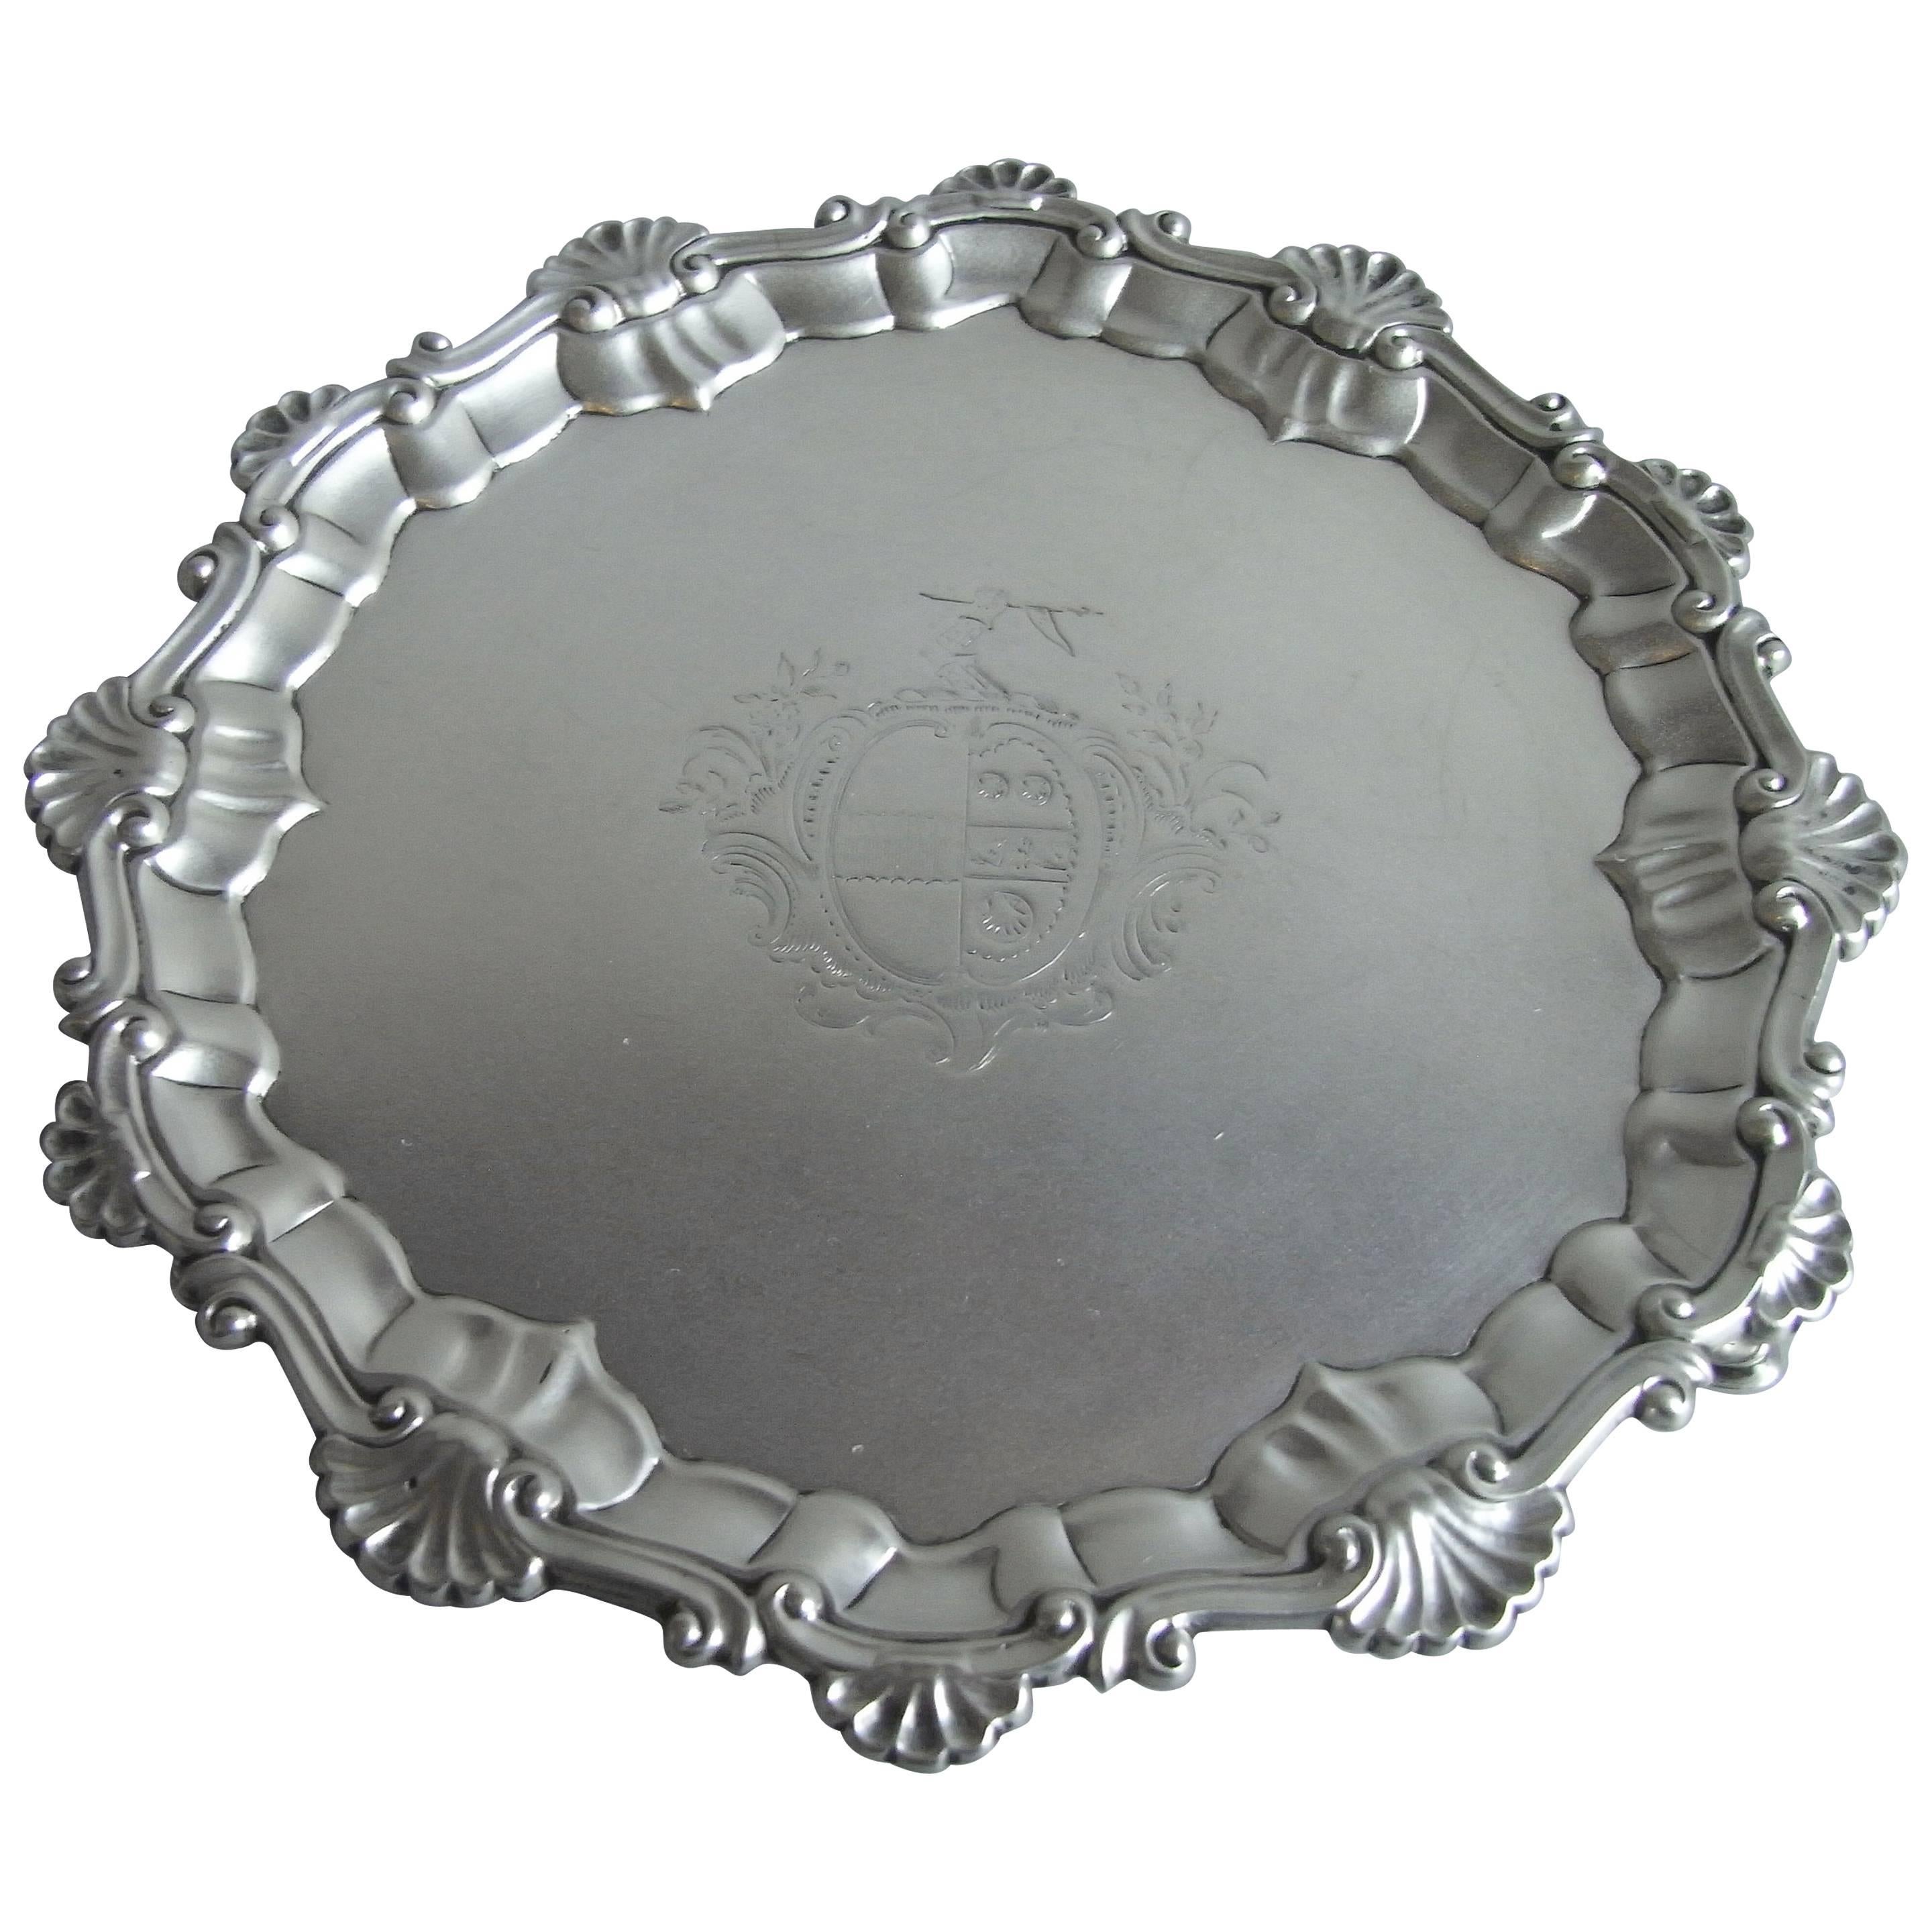 Early George III Salver Made in London in 1761 by Ebenezer Coker For Sale